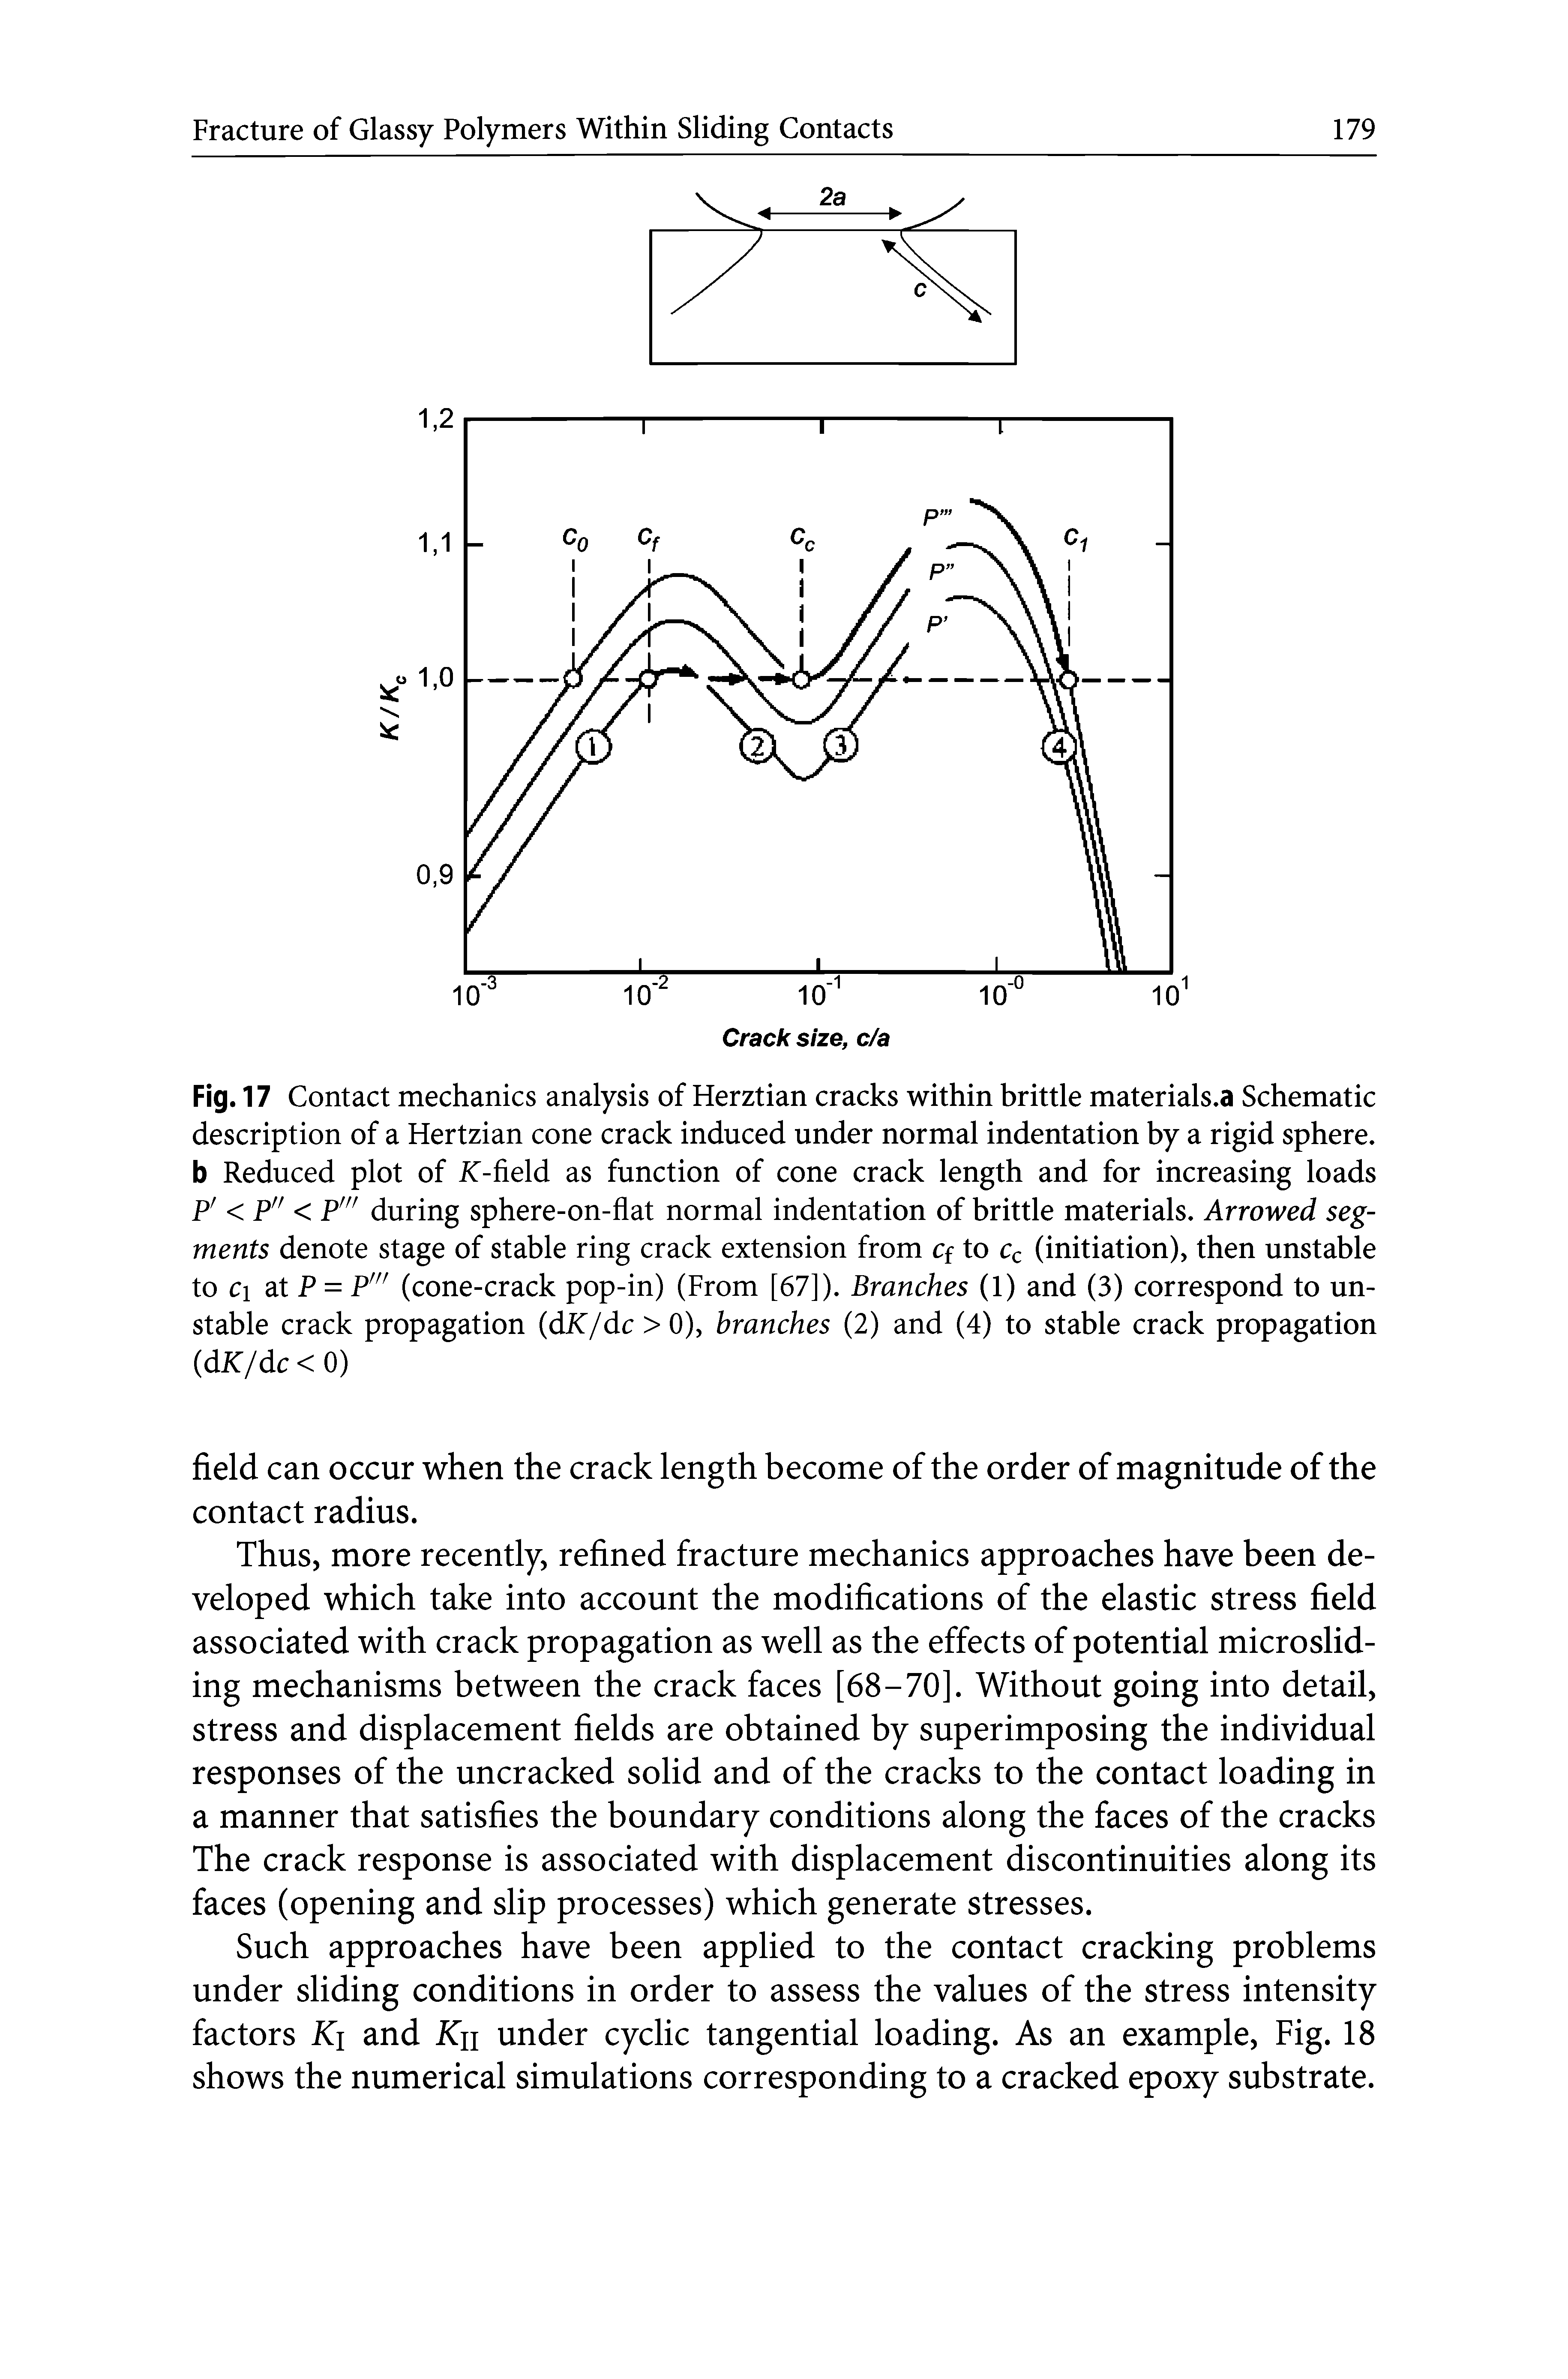 Fig. 17 Contact mechanics analysis of Herztian cracks within brittle materials.a Schematic description of a Hertzian cone crack induced under normal indentation by a rigid sphere, b Reduced plot of iC-field as function of cone crack length and for increasing loads pf p// p/// (tuj-ing sphere-on-flat normal indentation of brittle materials. Arrowed seg-...